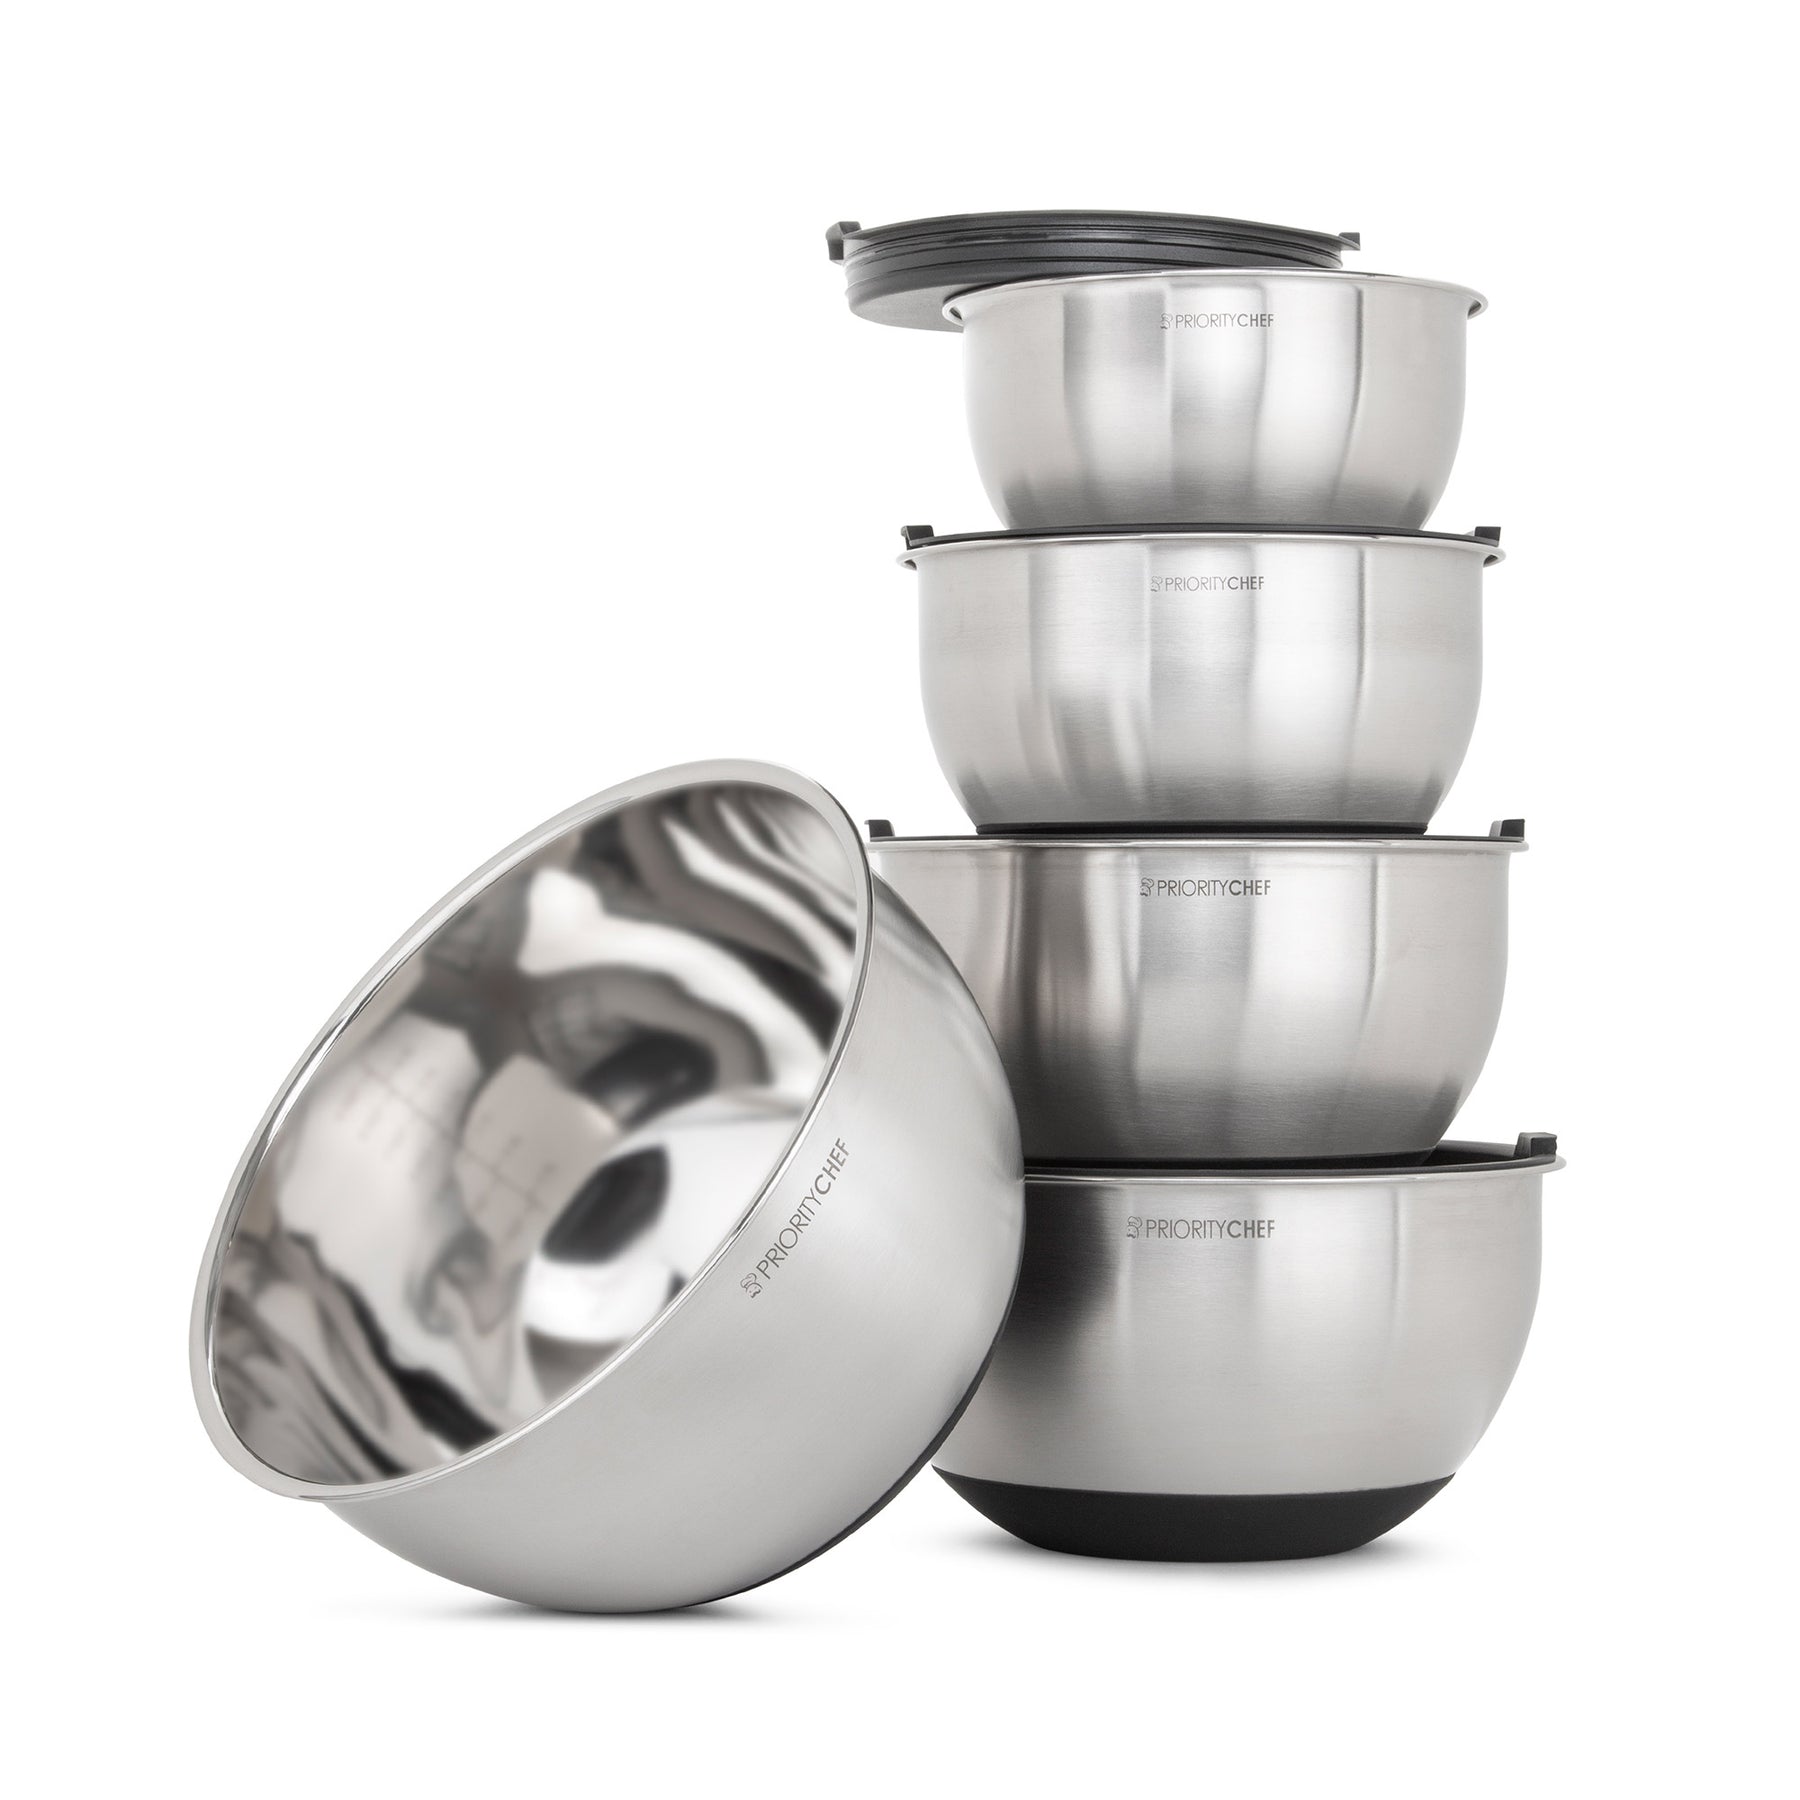 https://www.momjunction.com/wp-content/uploads/product-images/priority-chef-stainless-steel-mixing-bowls-with-lids_afl904.jpg